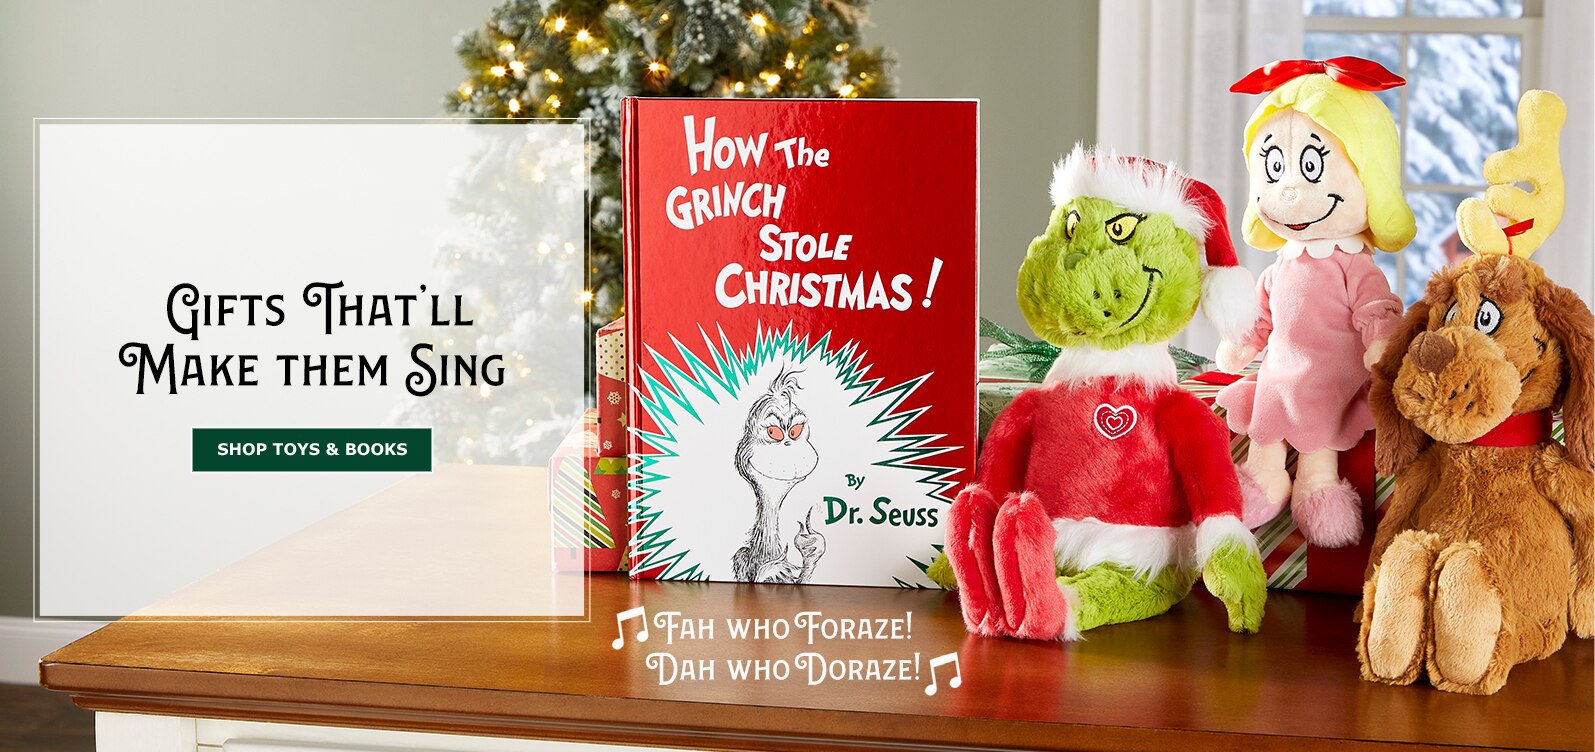 Gifts That'll Make them Sing. How The Grinch Stole Christmas! Fah who foraze! Dah who doraze! Shop Toys & Books